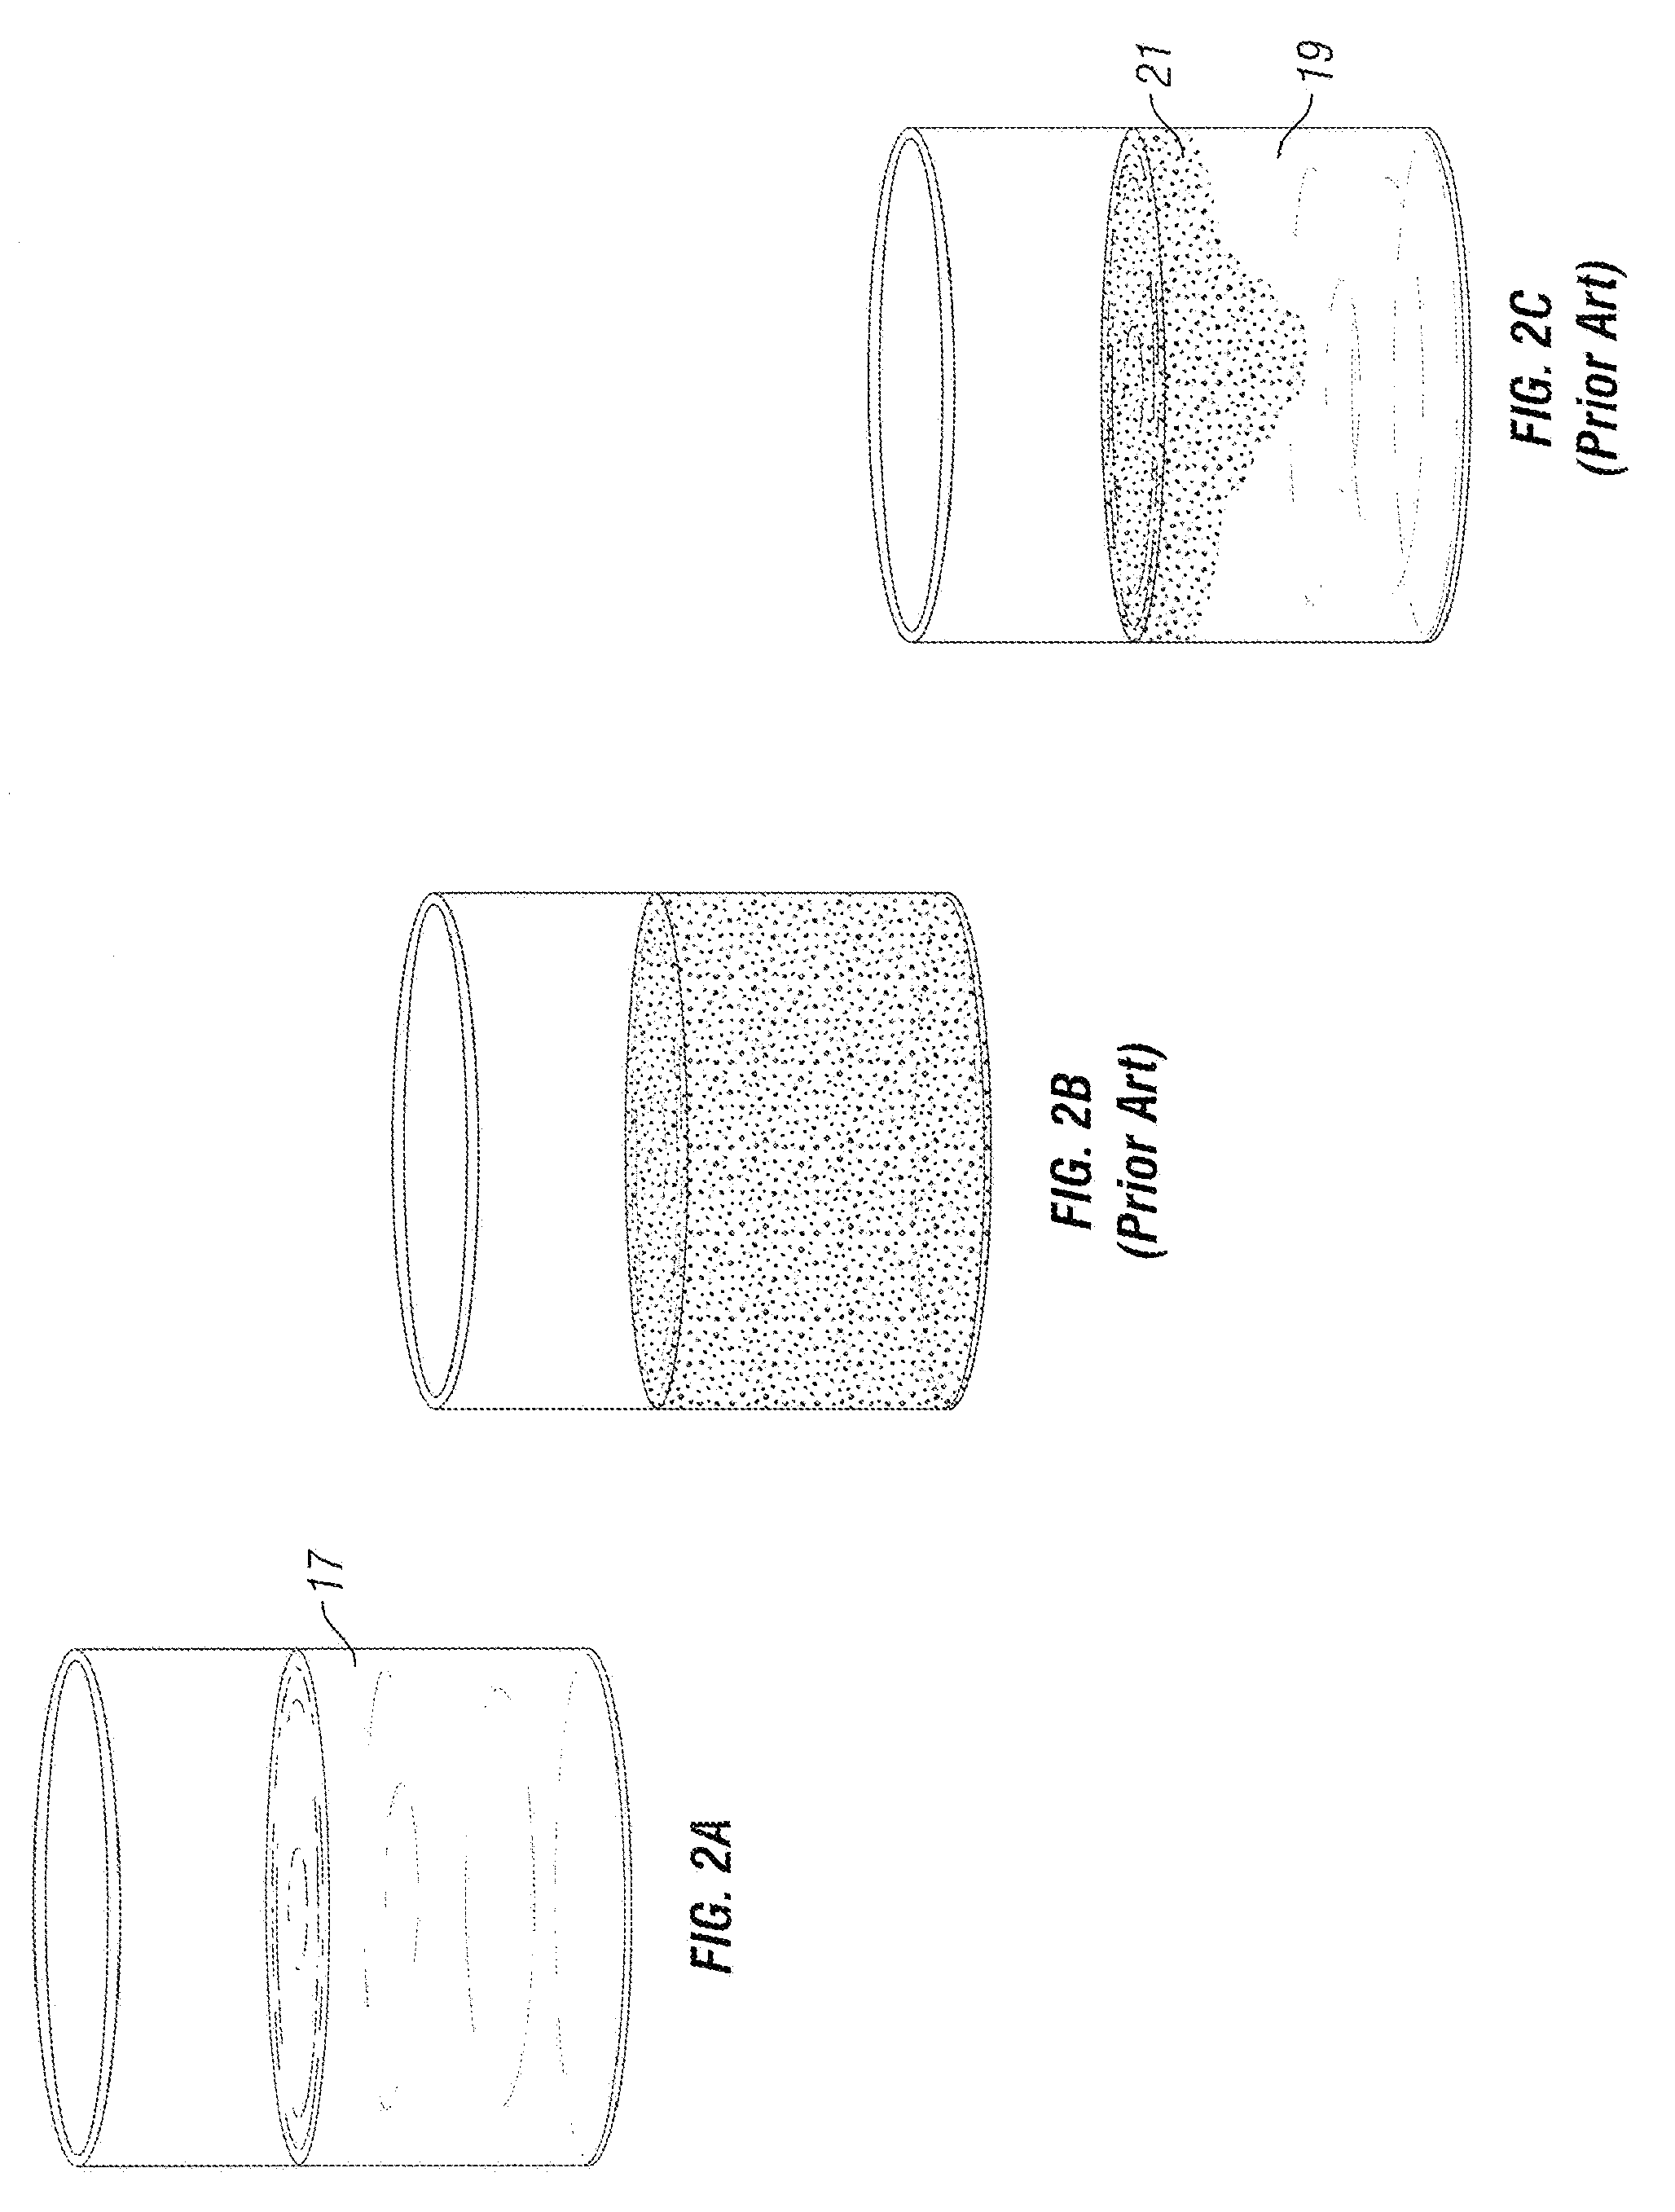 Method for enhancing oil recovery with an improved oil recovery surfactant